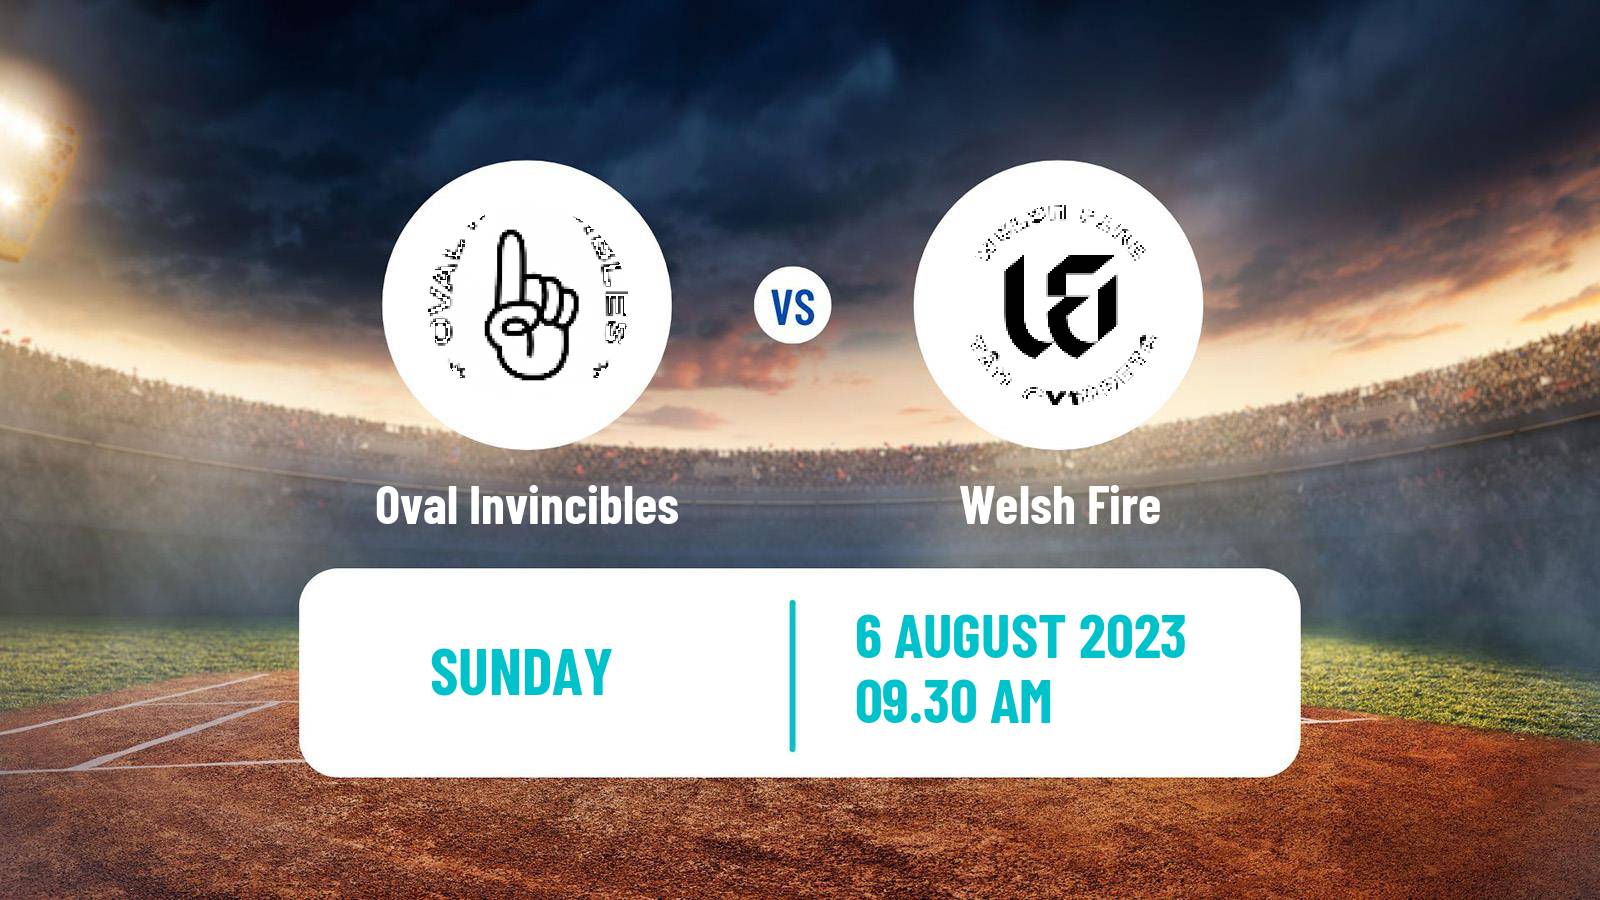 Cricket United Kingdom The Hundred Cricket Women Oval Invincibles - Welsh Fire